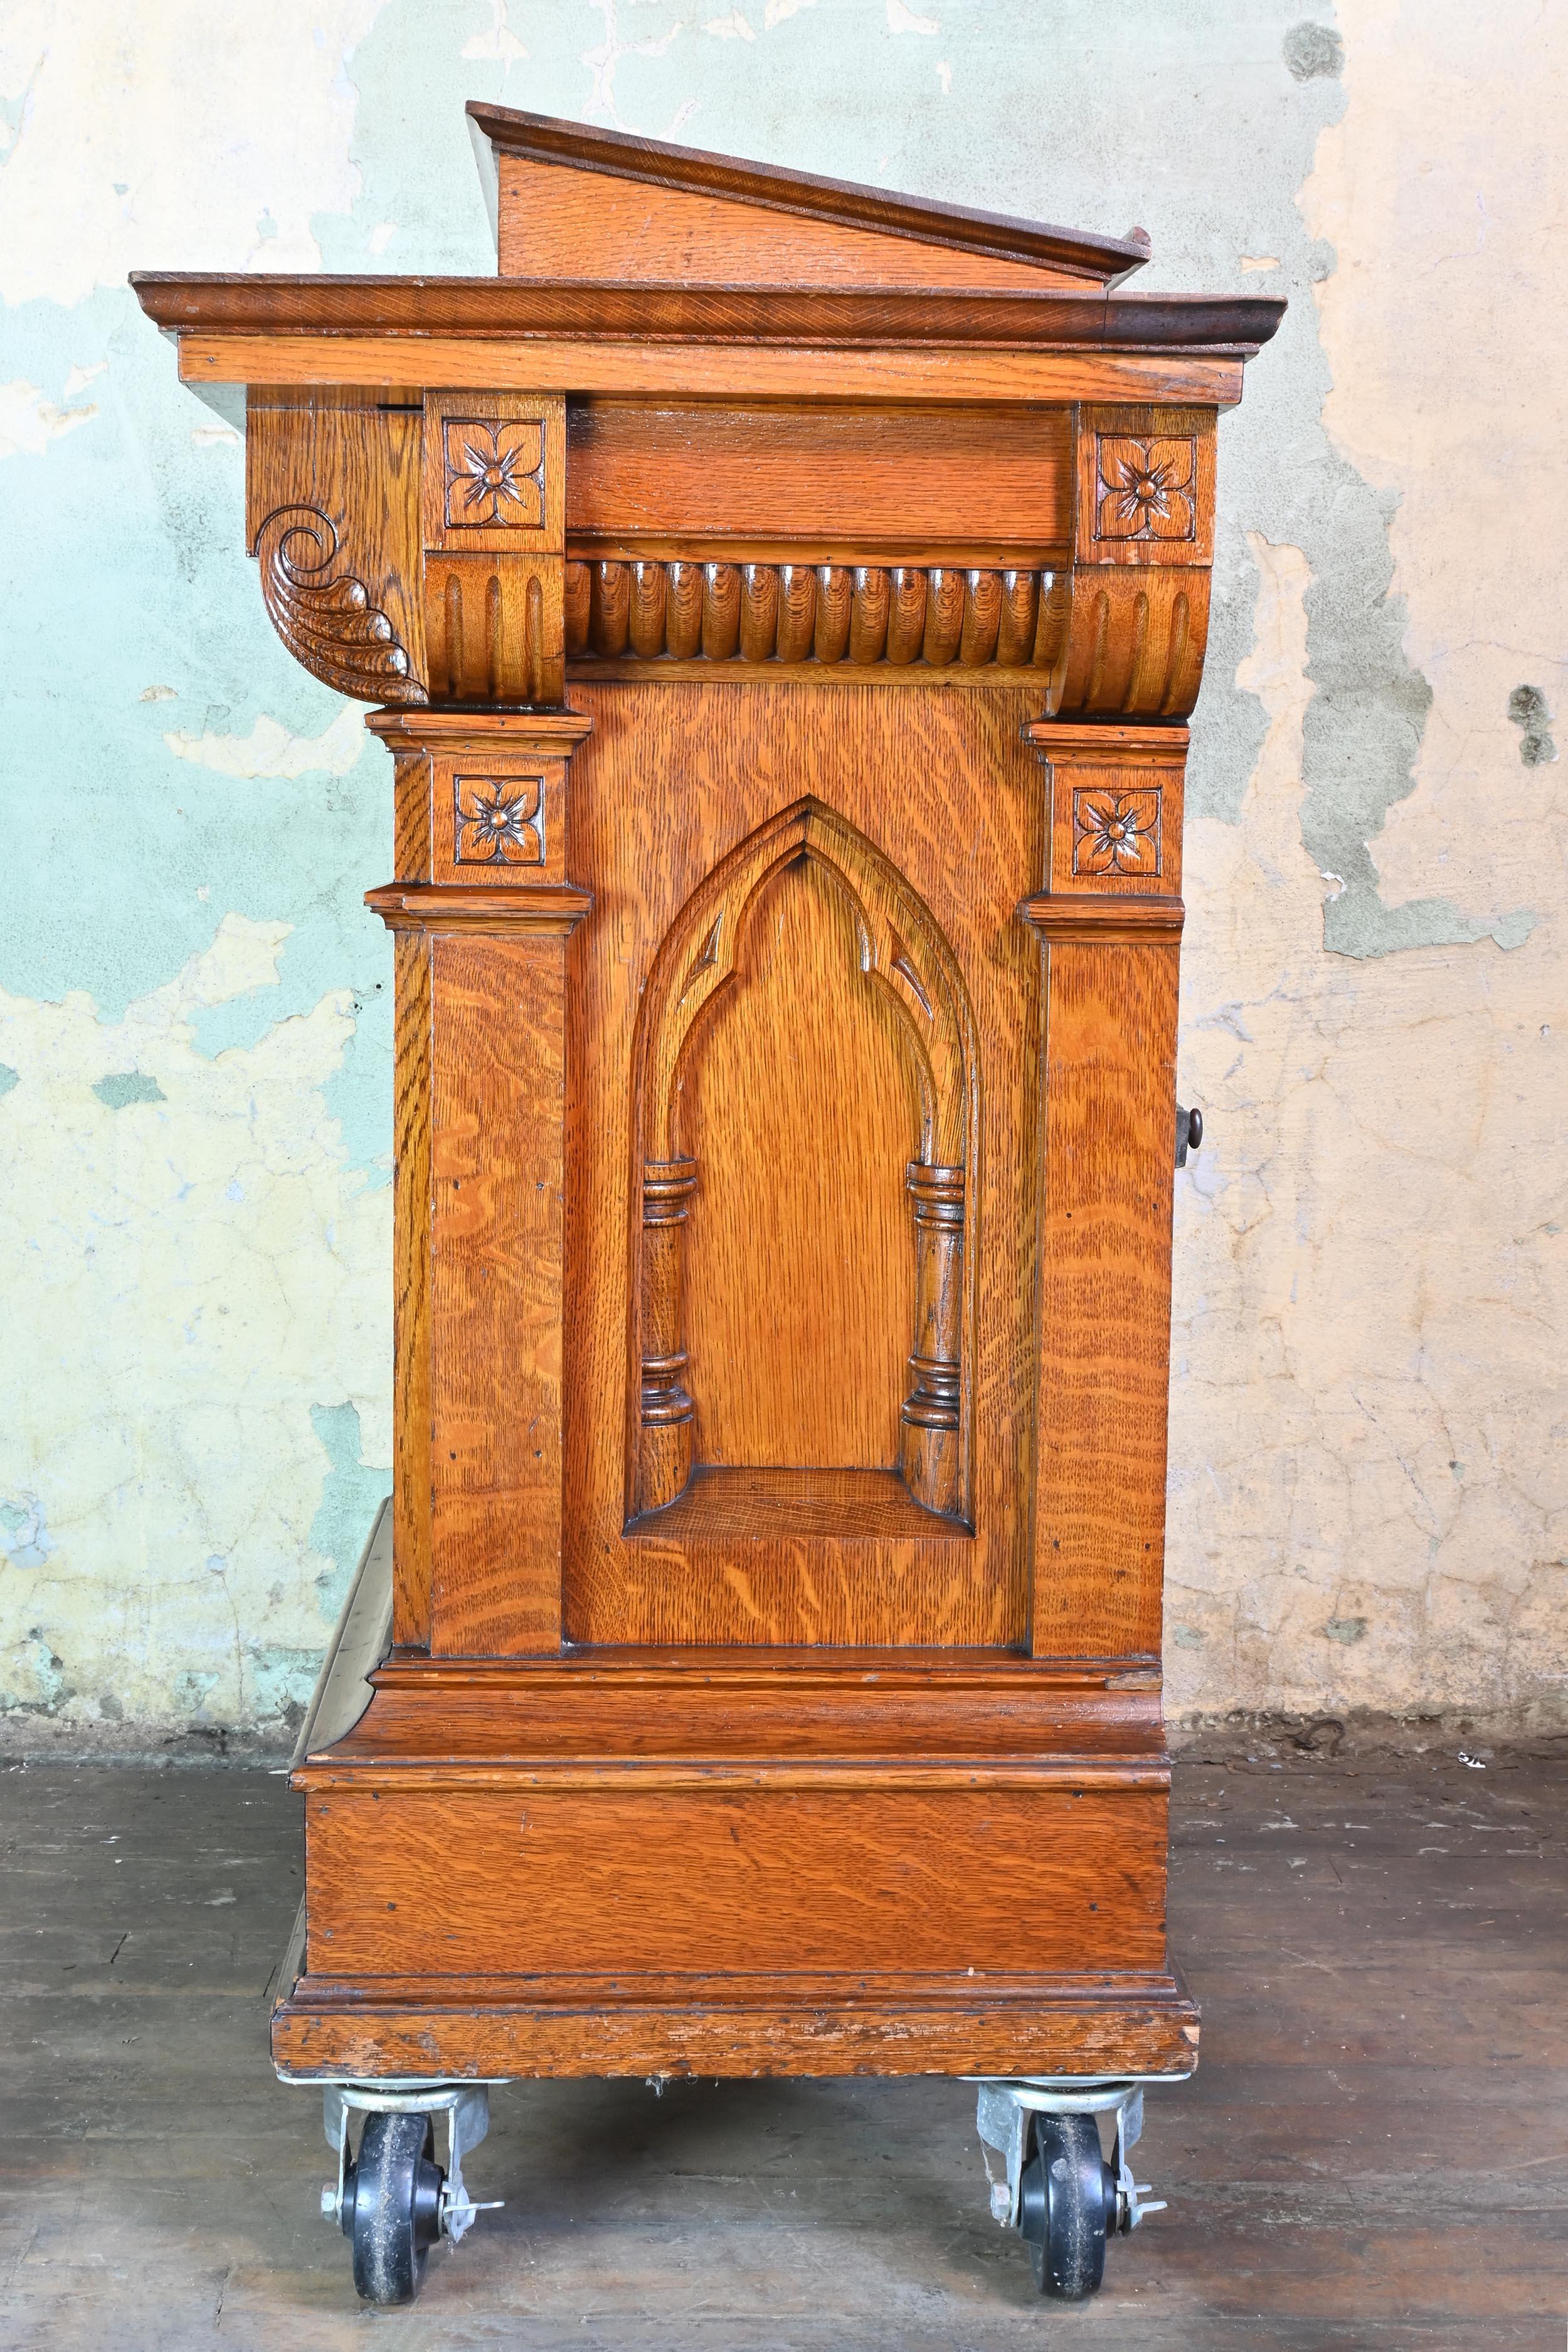 Quartersawn (Tiger) oak deep relief lectern with spoon carved details

1 available
AA# 60093
 Circa: 1900s
 Condition: Very good
 Material: Tiger or quarter sawn oak 
 Finish: Original
 Origin: University of Minnesota area church,